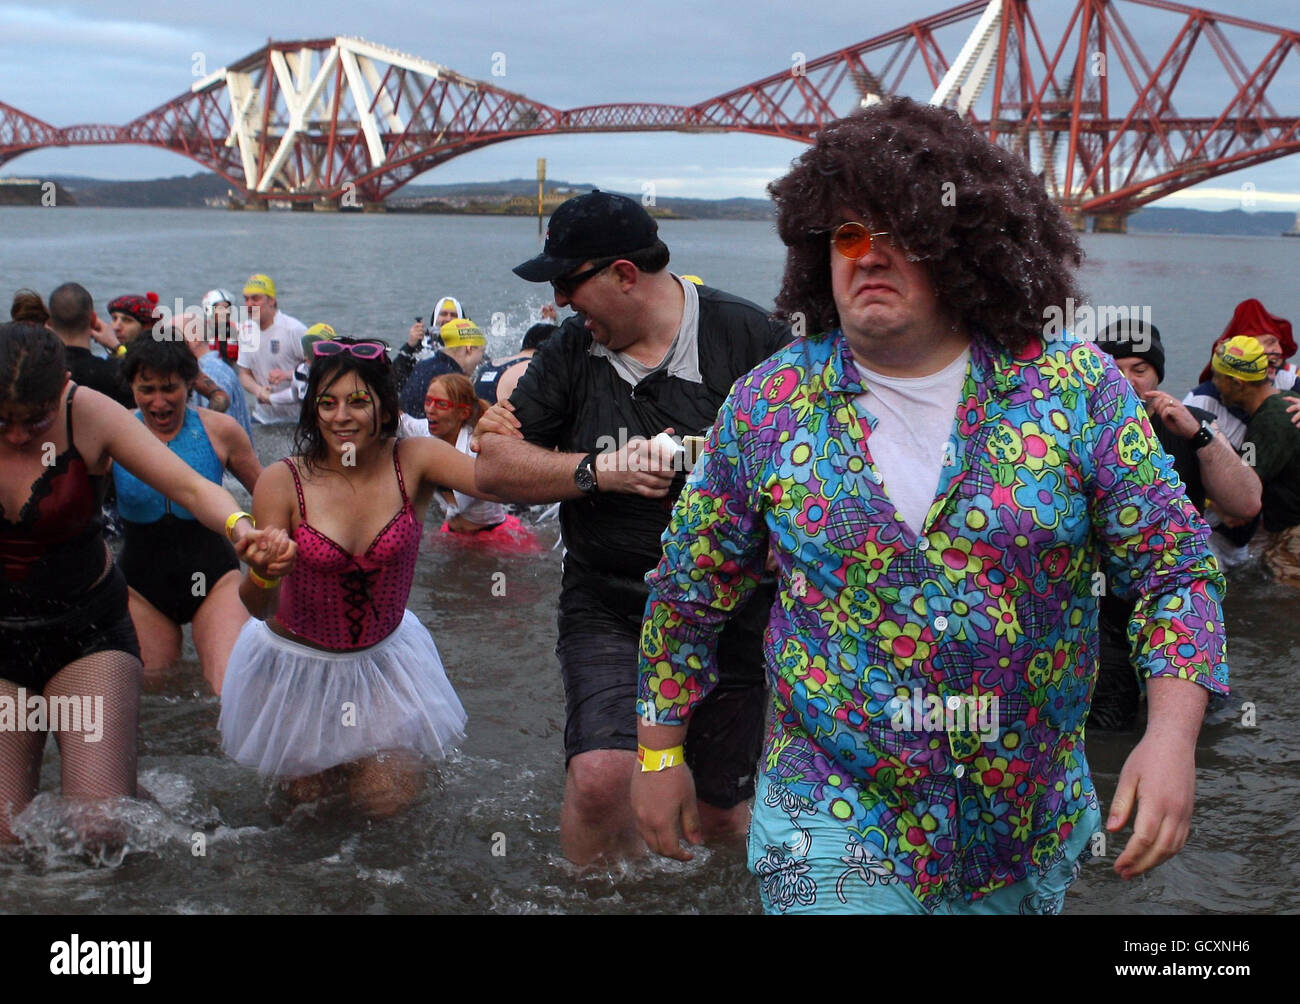 Swimmers brave the cold in the River Forth near Edinburgh, during the Loony Dook, one of the annual New Year's day swims that take place around the UK. Stock Photo